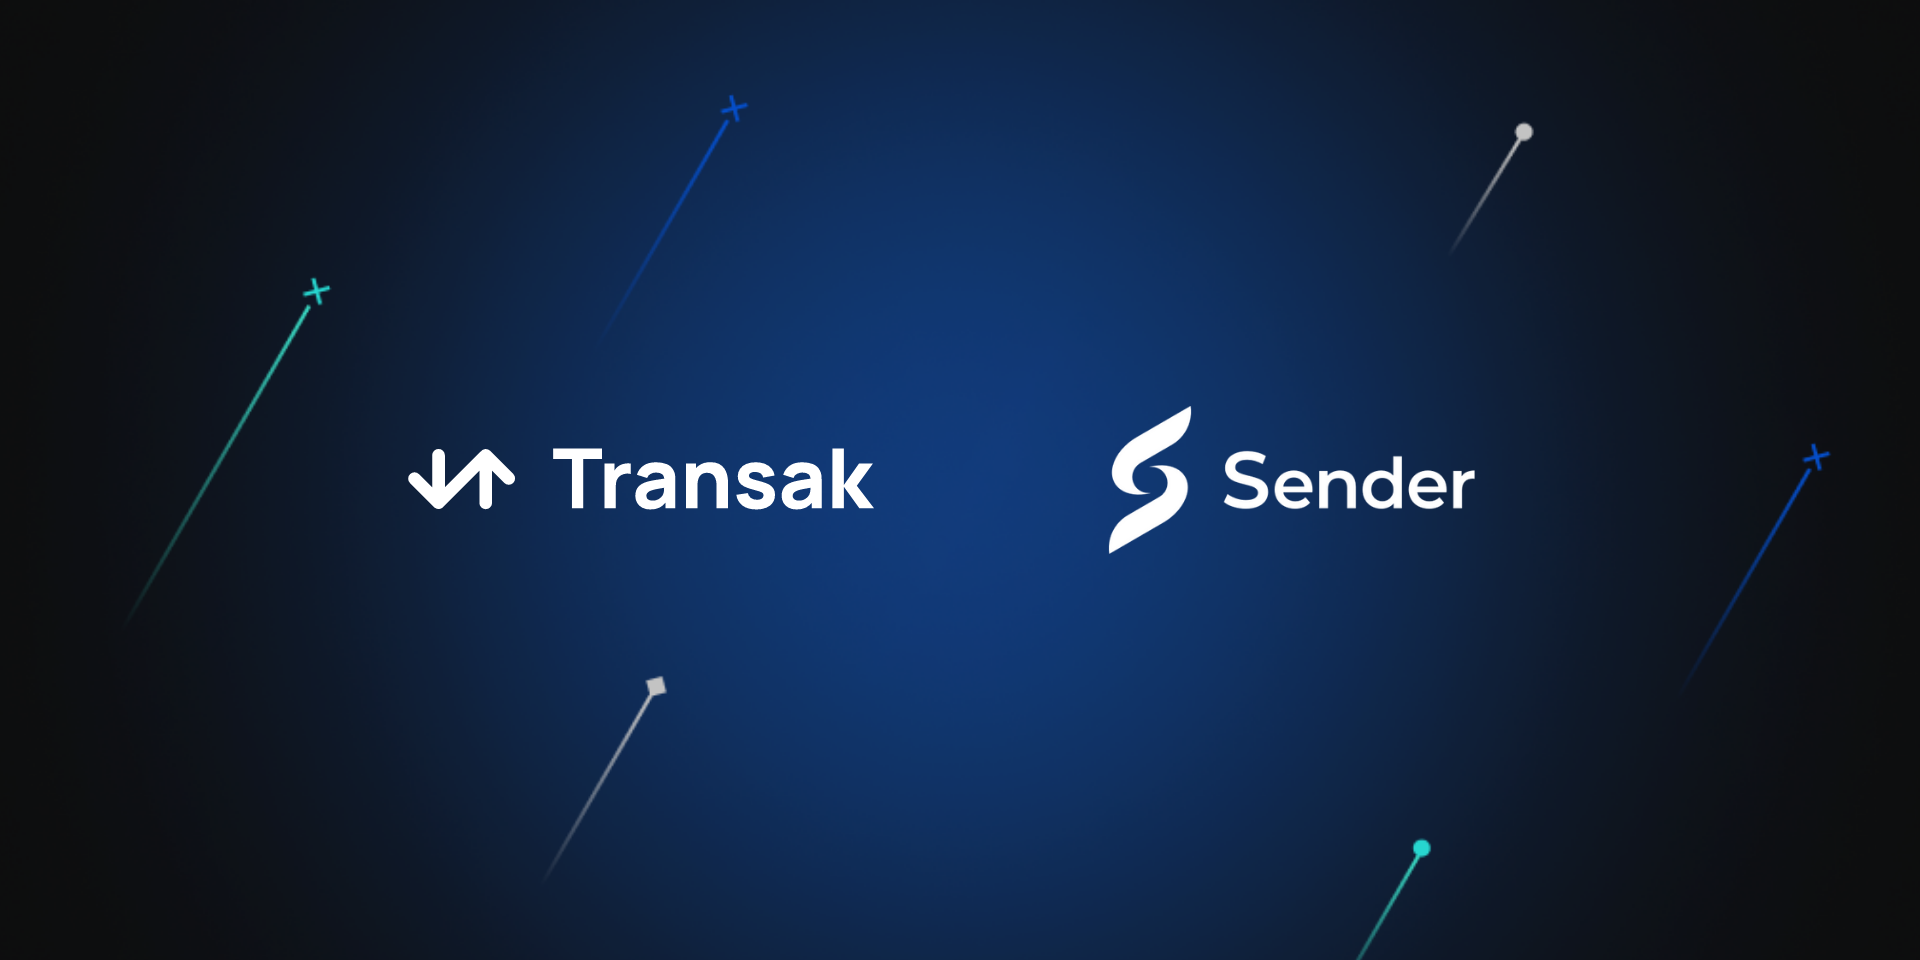 Buy $NEAR directly on Sender Wallet with Fiat currency using Transak